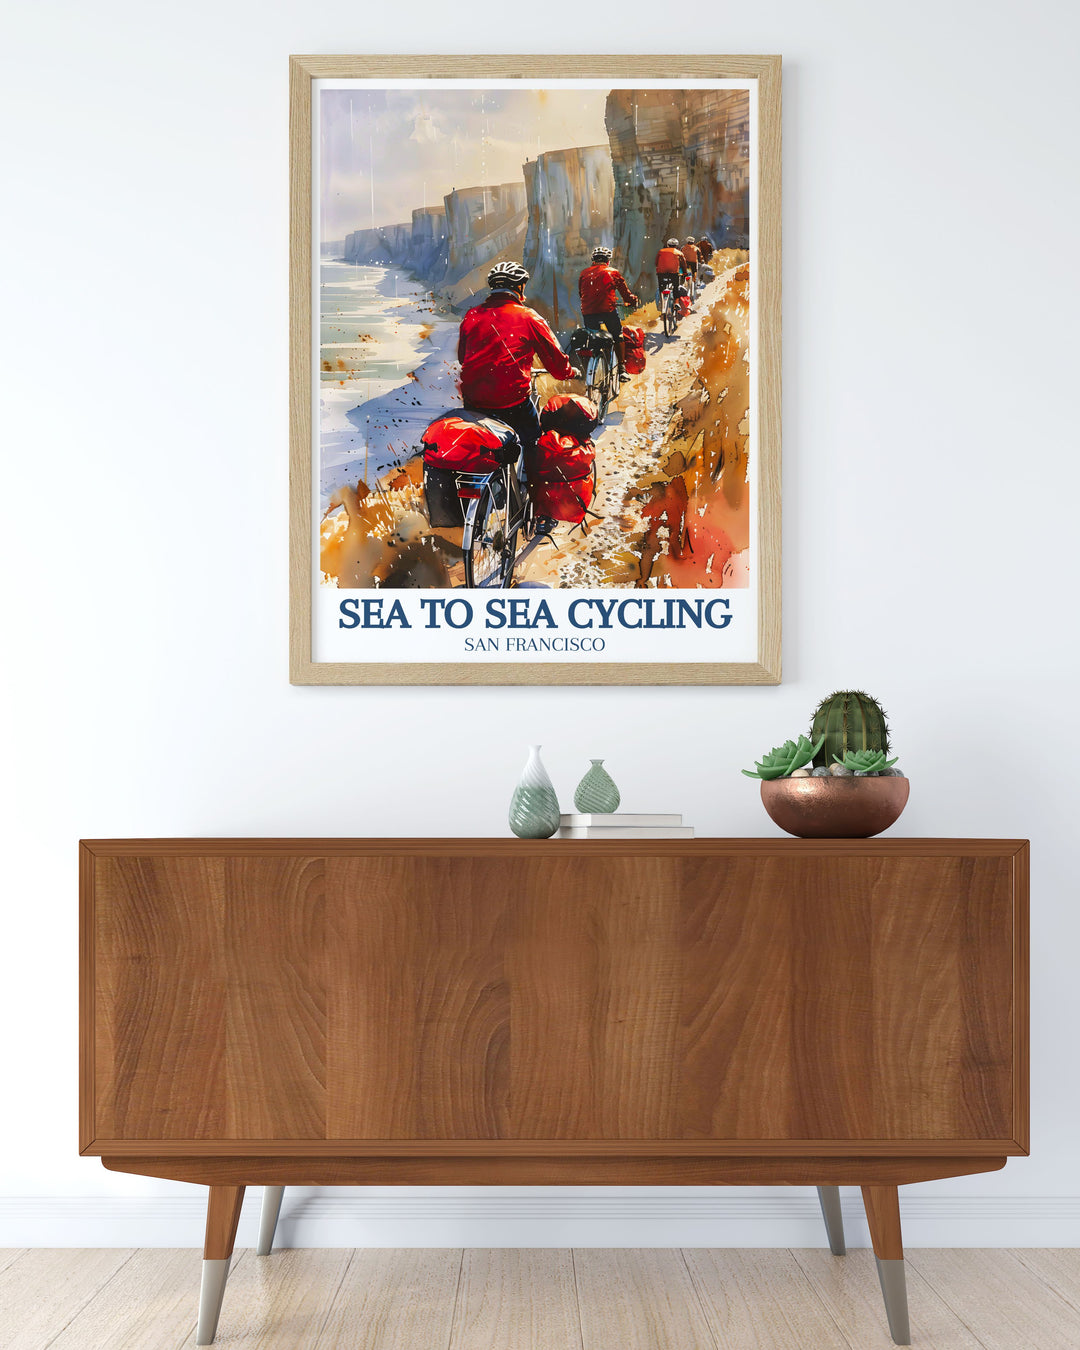 Experience the thrill of the Sea to Sea Cycling Route with this detailed poster, capturing the iconic Cliffs of Dover and the serene Lake District, ideal for any cycling themed home decor.